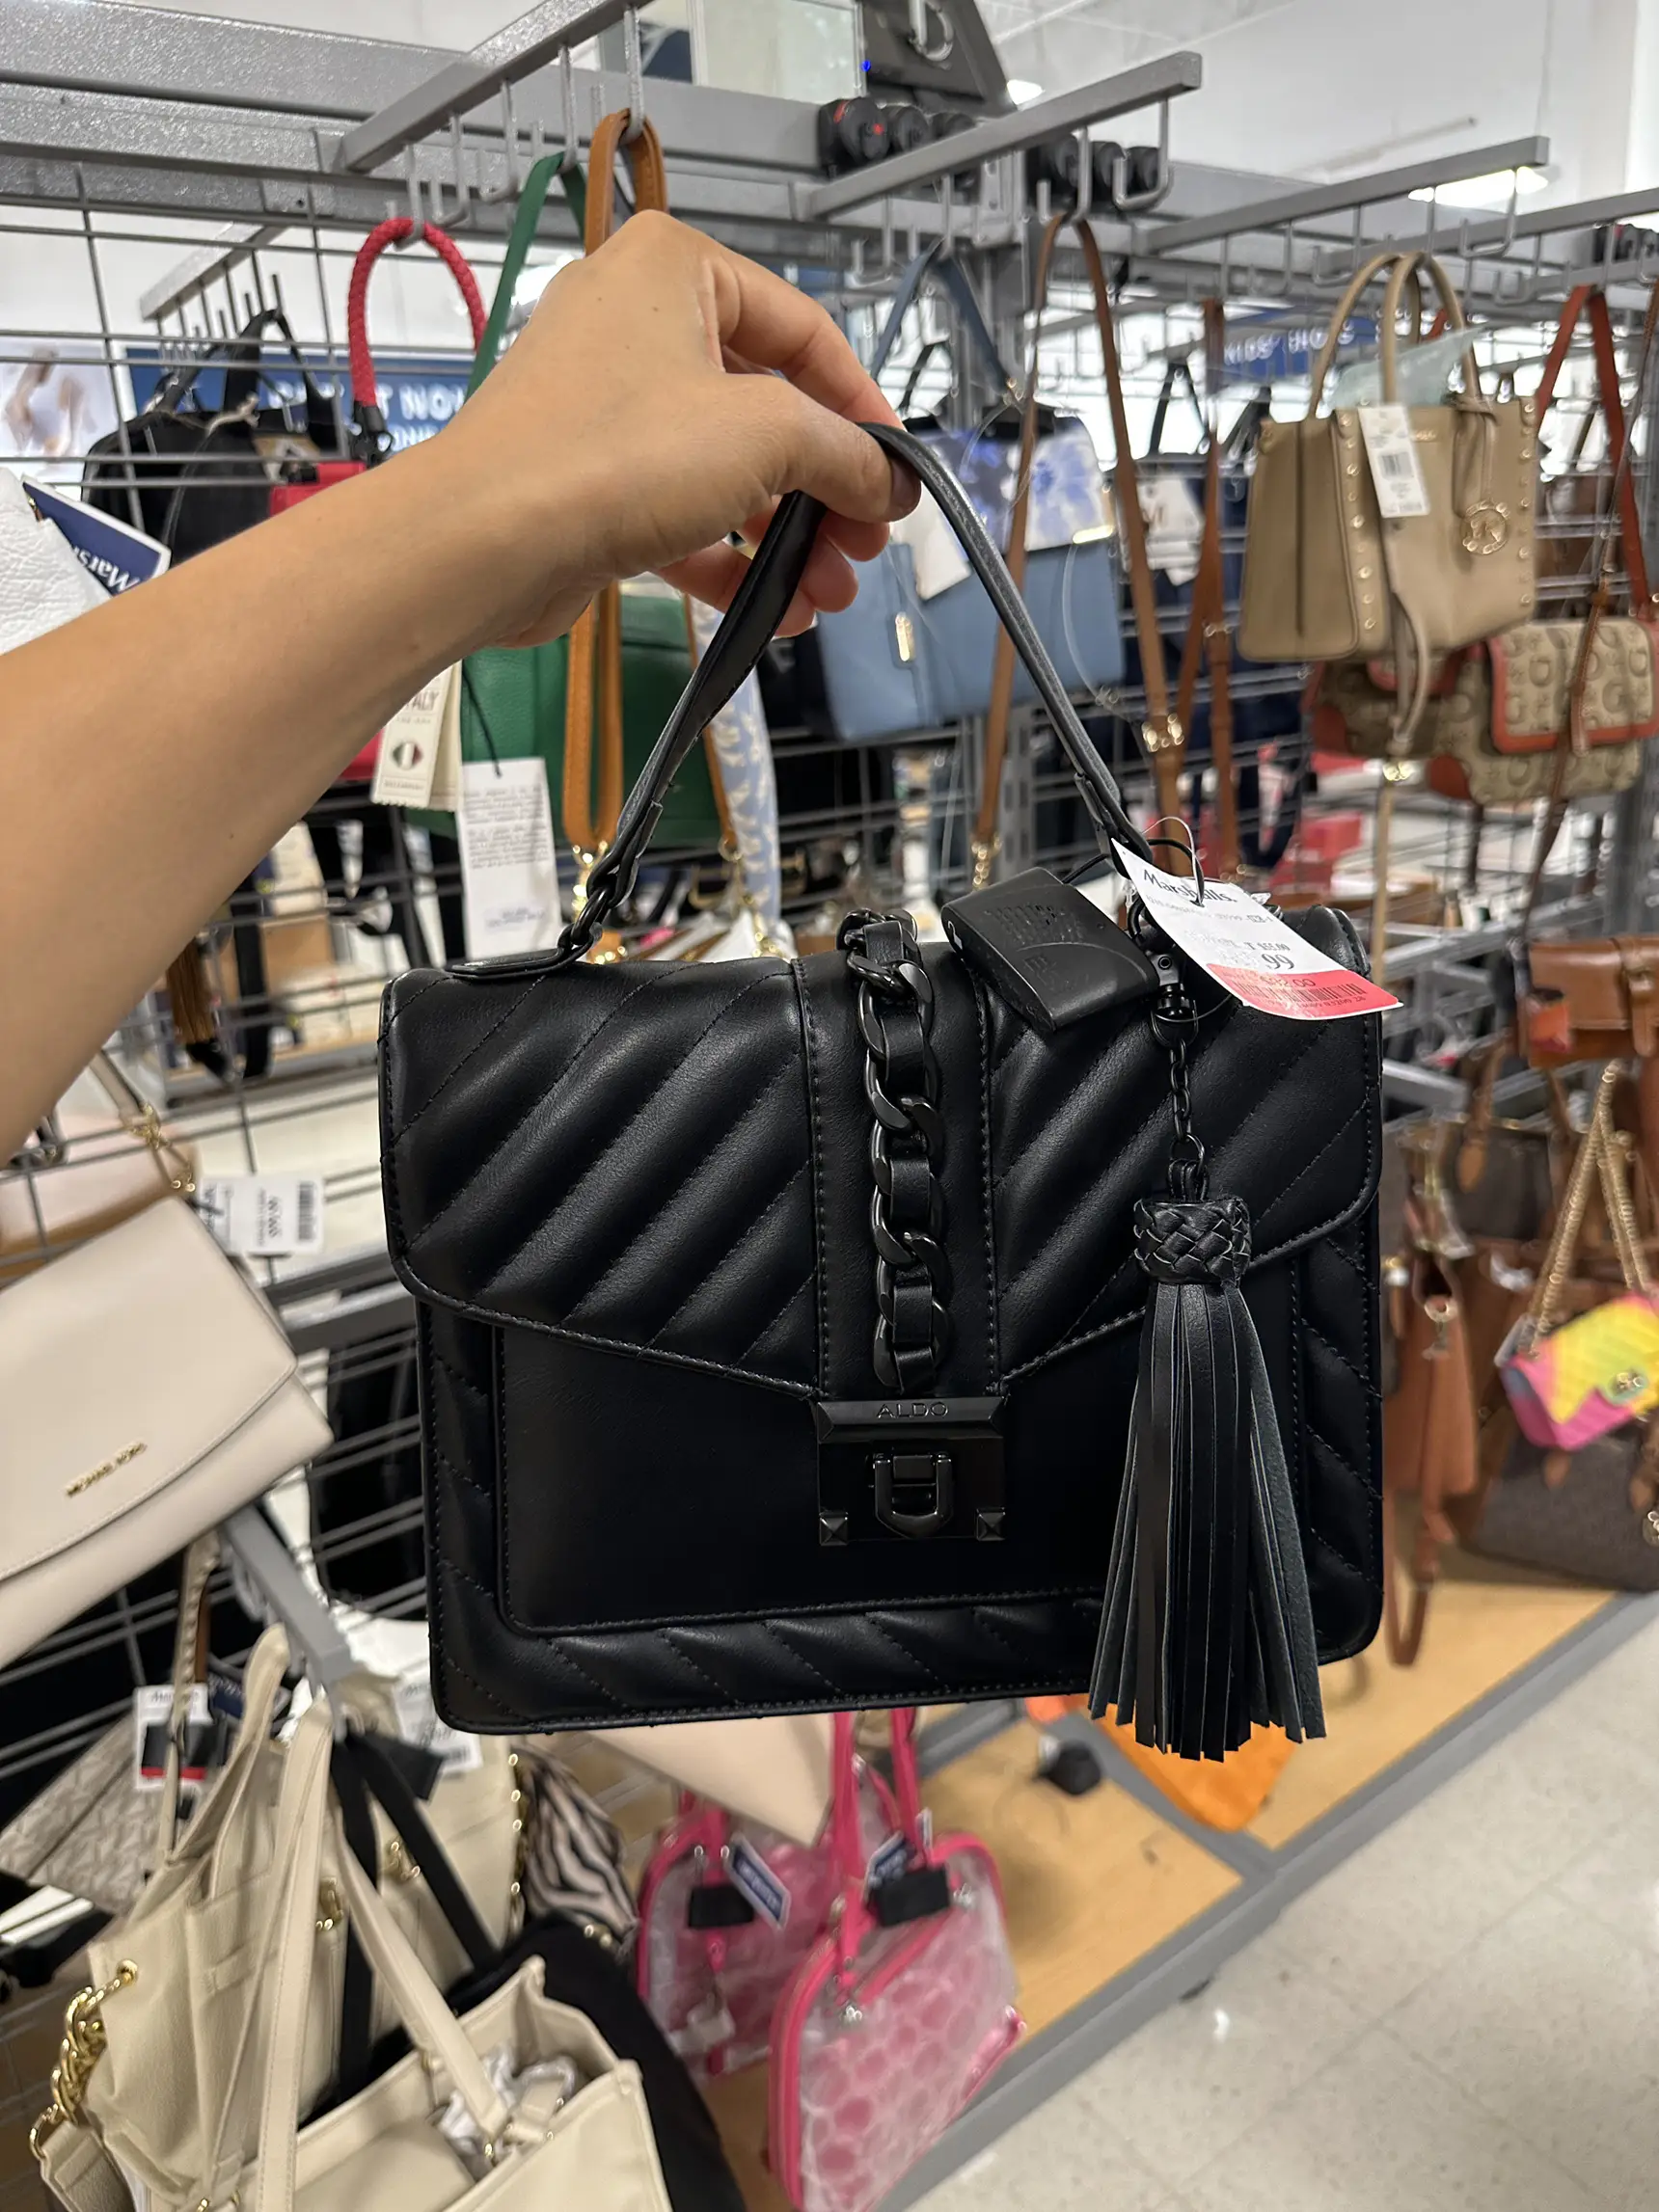 Marshalls Finds 🖤, Gallery posted by AshleyMar 🖤